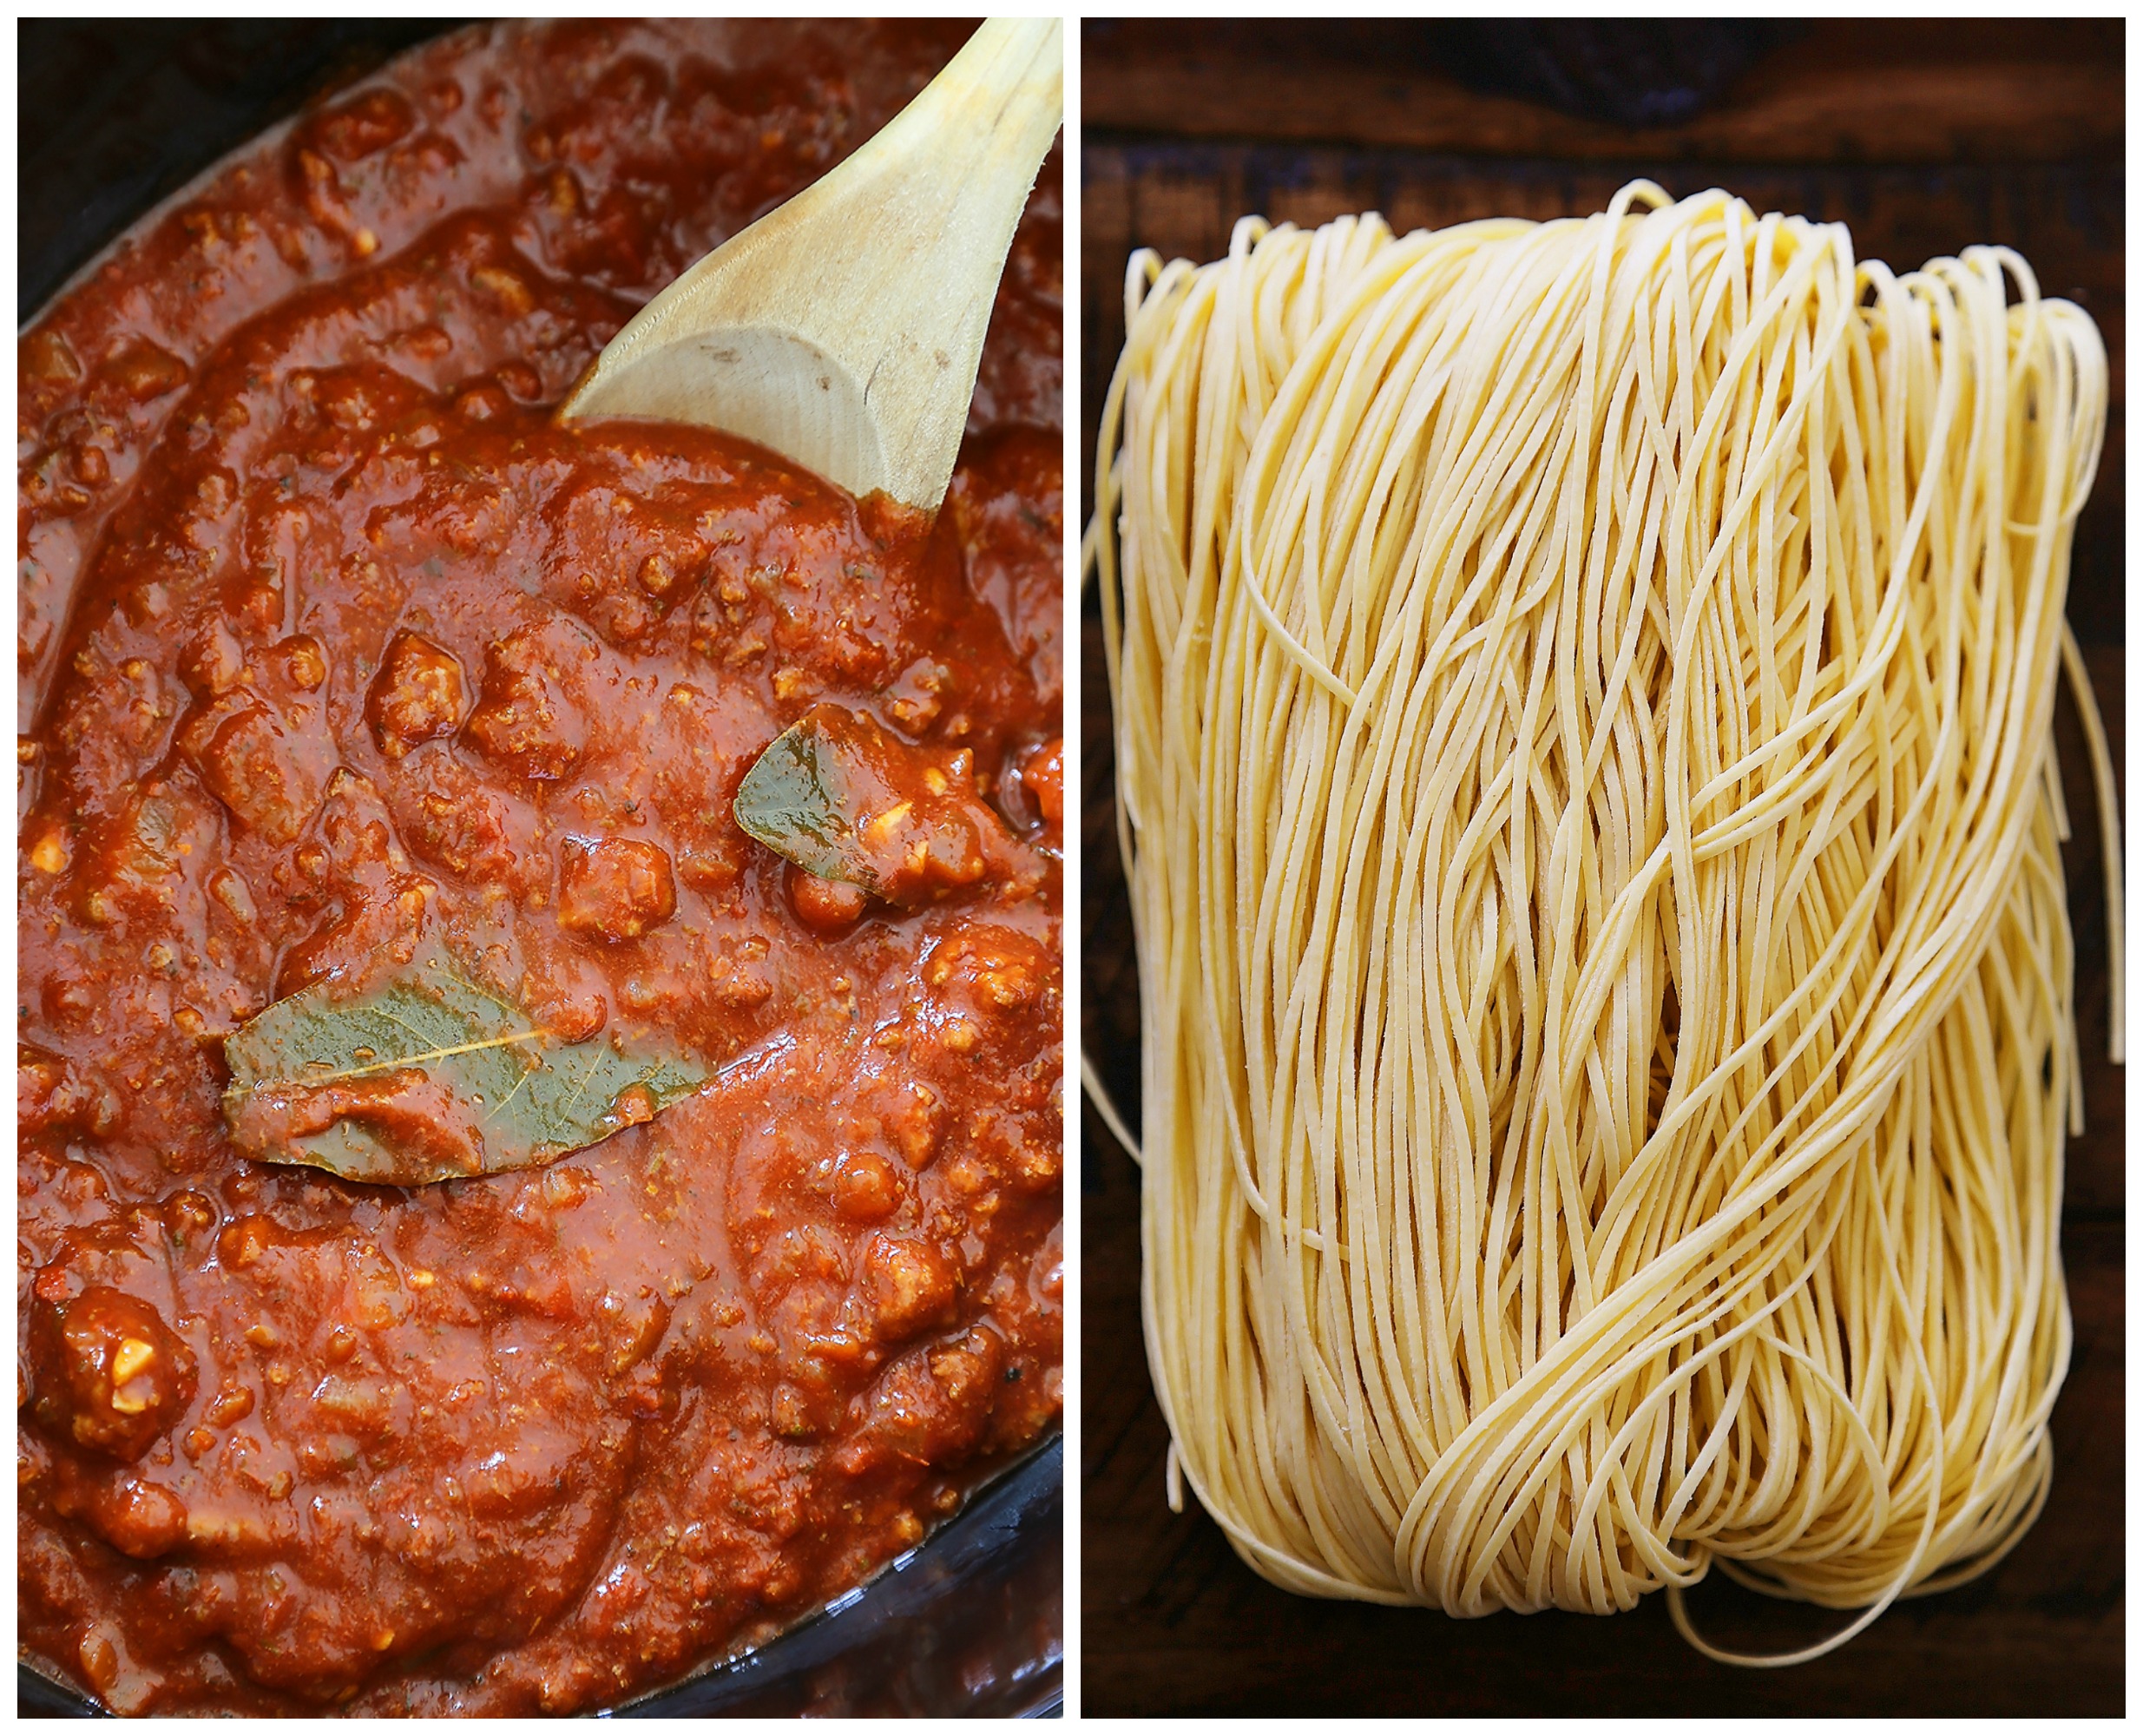 Slow cooker spaghetti bolognese - A rich and classic Italian pasta sauce easy to make in your slow cooker! Freeze for later or dig with a bowl of hot spaghetti! thecomfortofcooking.com